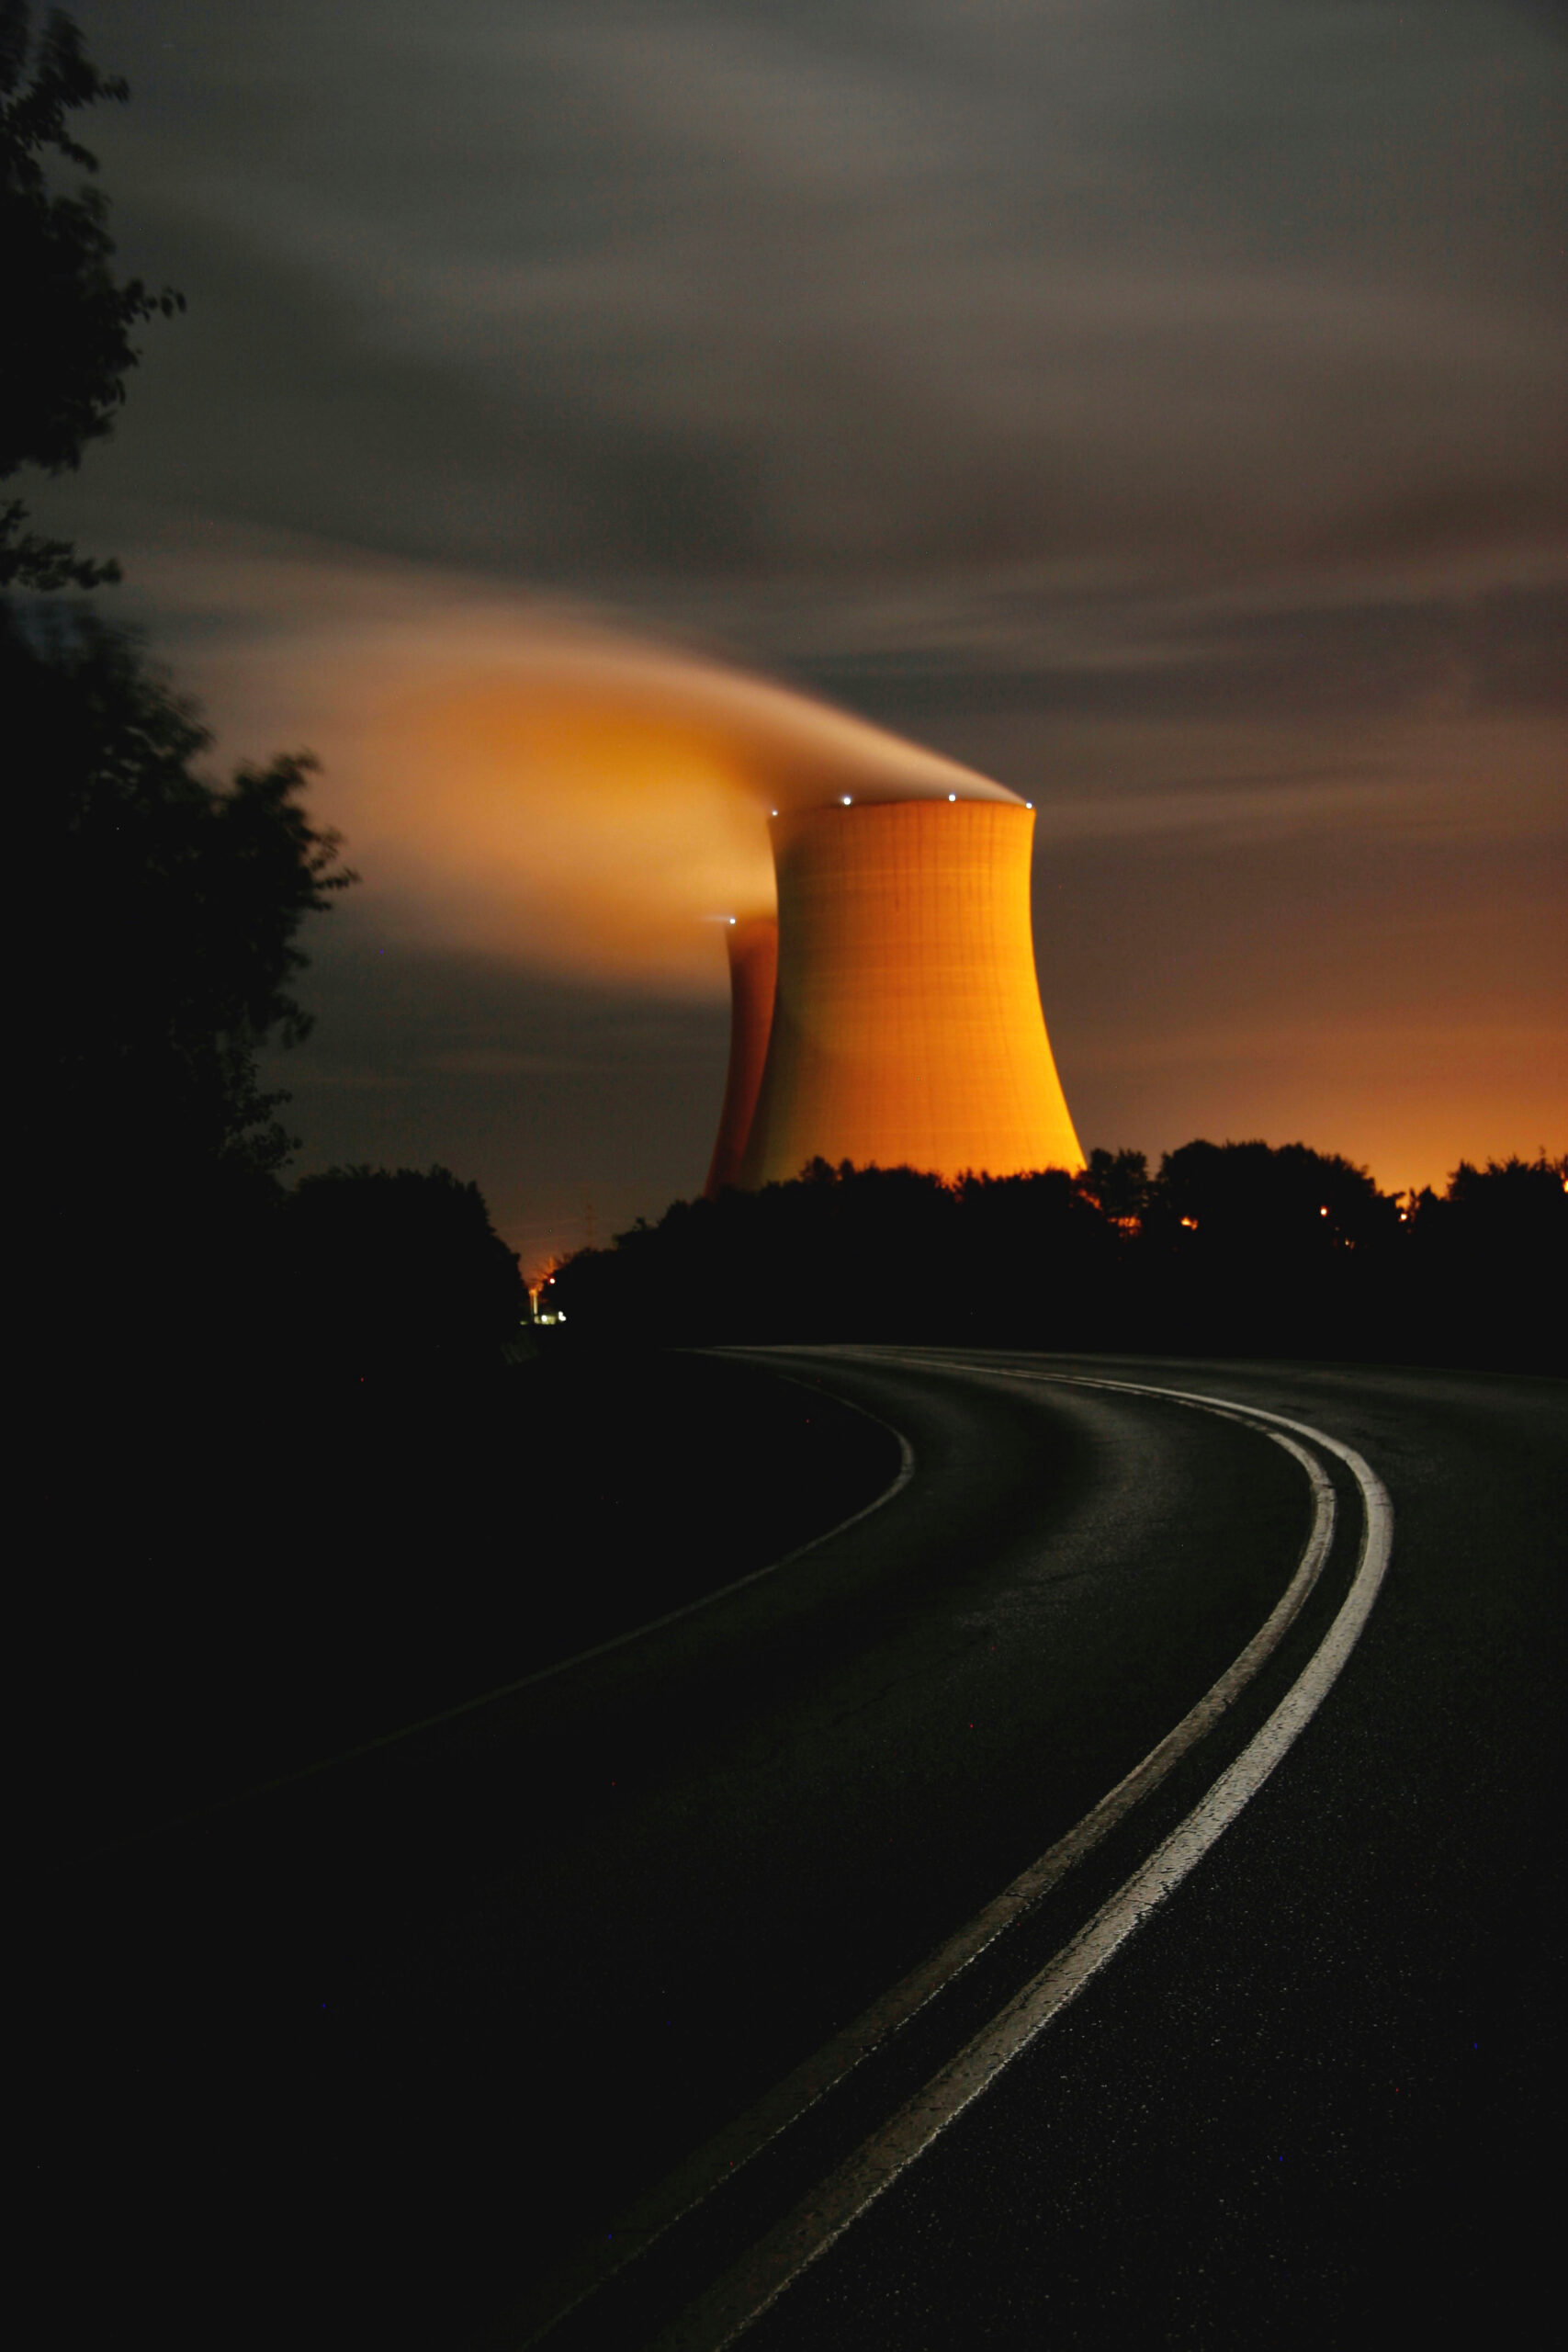 A nuclear power plant on a road at night.